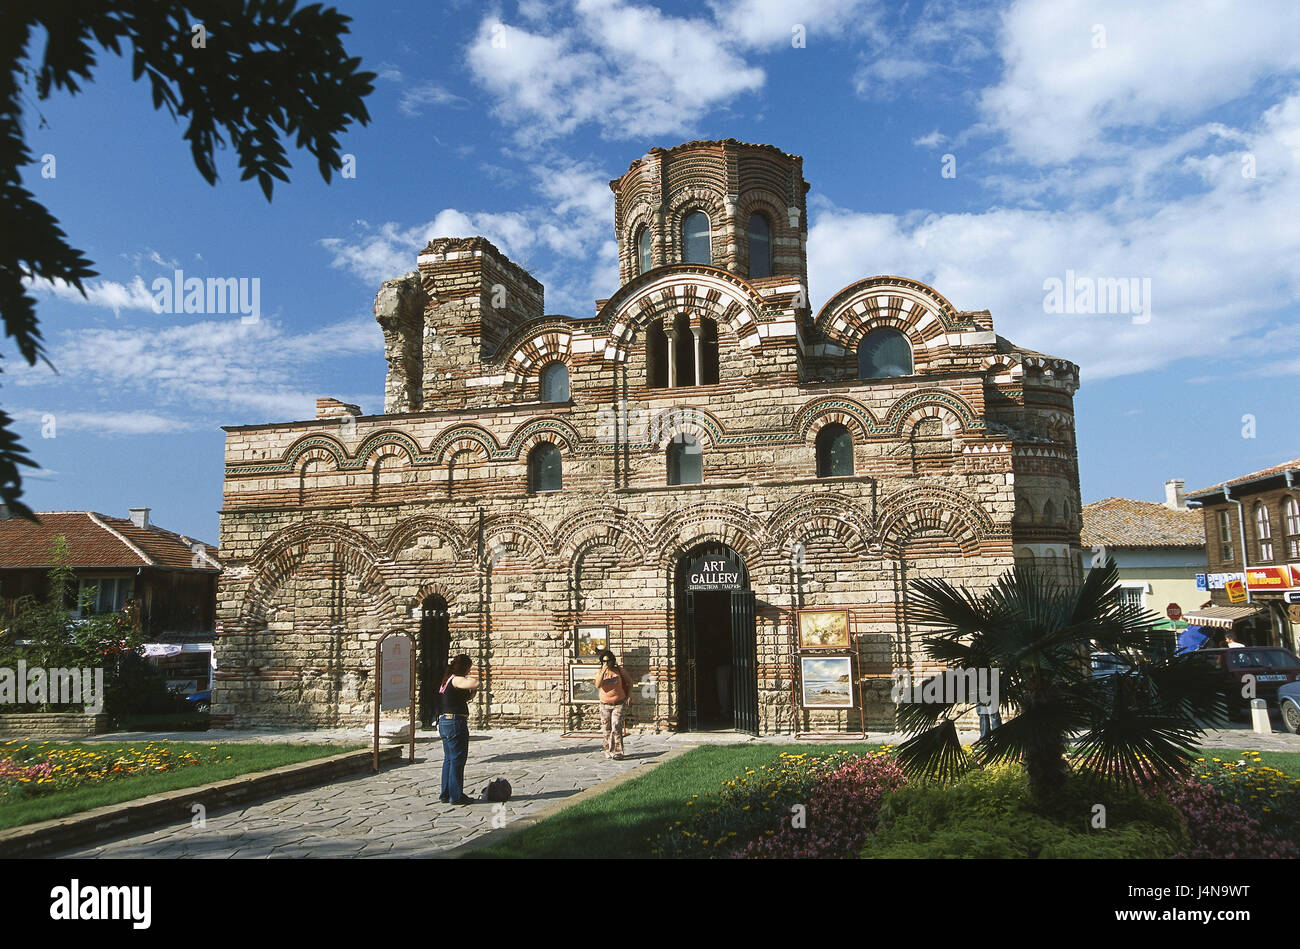 Bulgaria, Nessebar, Pantokrator church, outside, tourists, Black Sea coast, town, Old Town, Nesebar, building, historically, church, Pantokratorkirche, place of interest, landmark, faith, religion, cross dome church, architecture, 13. Cent., UNESCO-world cultural heritage, visitor, person, tourism, summer, facade, input, Art-Gallery, Stock Photo